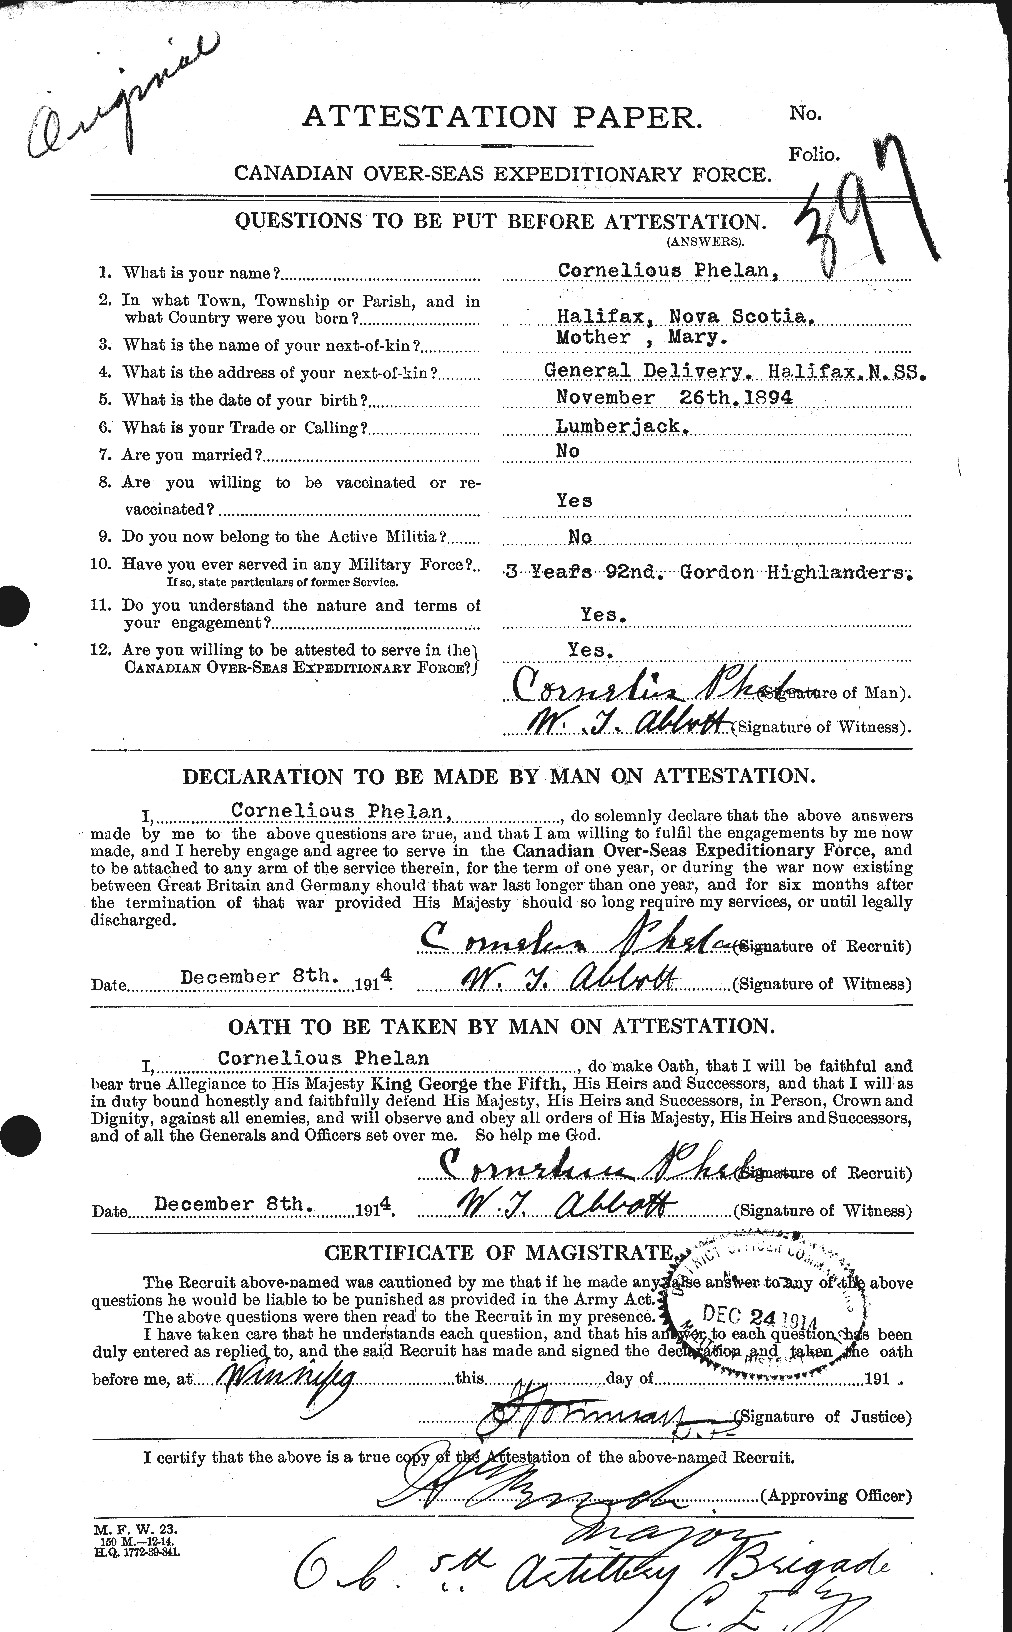 Personnel Records of the First World War - CEF 576940a